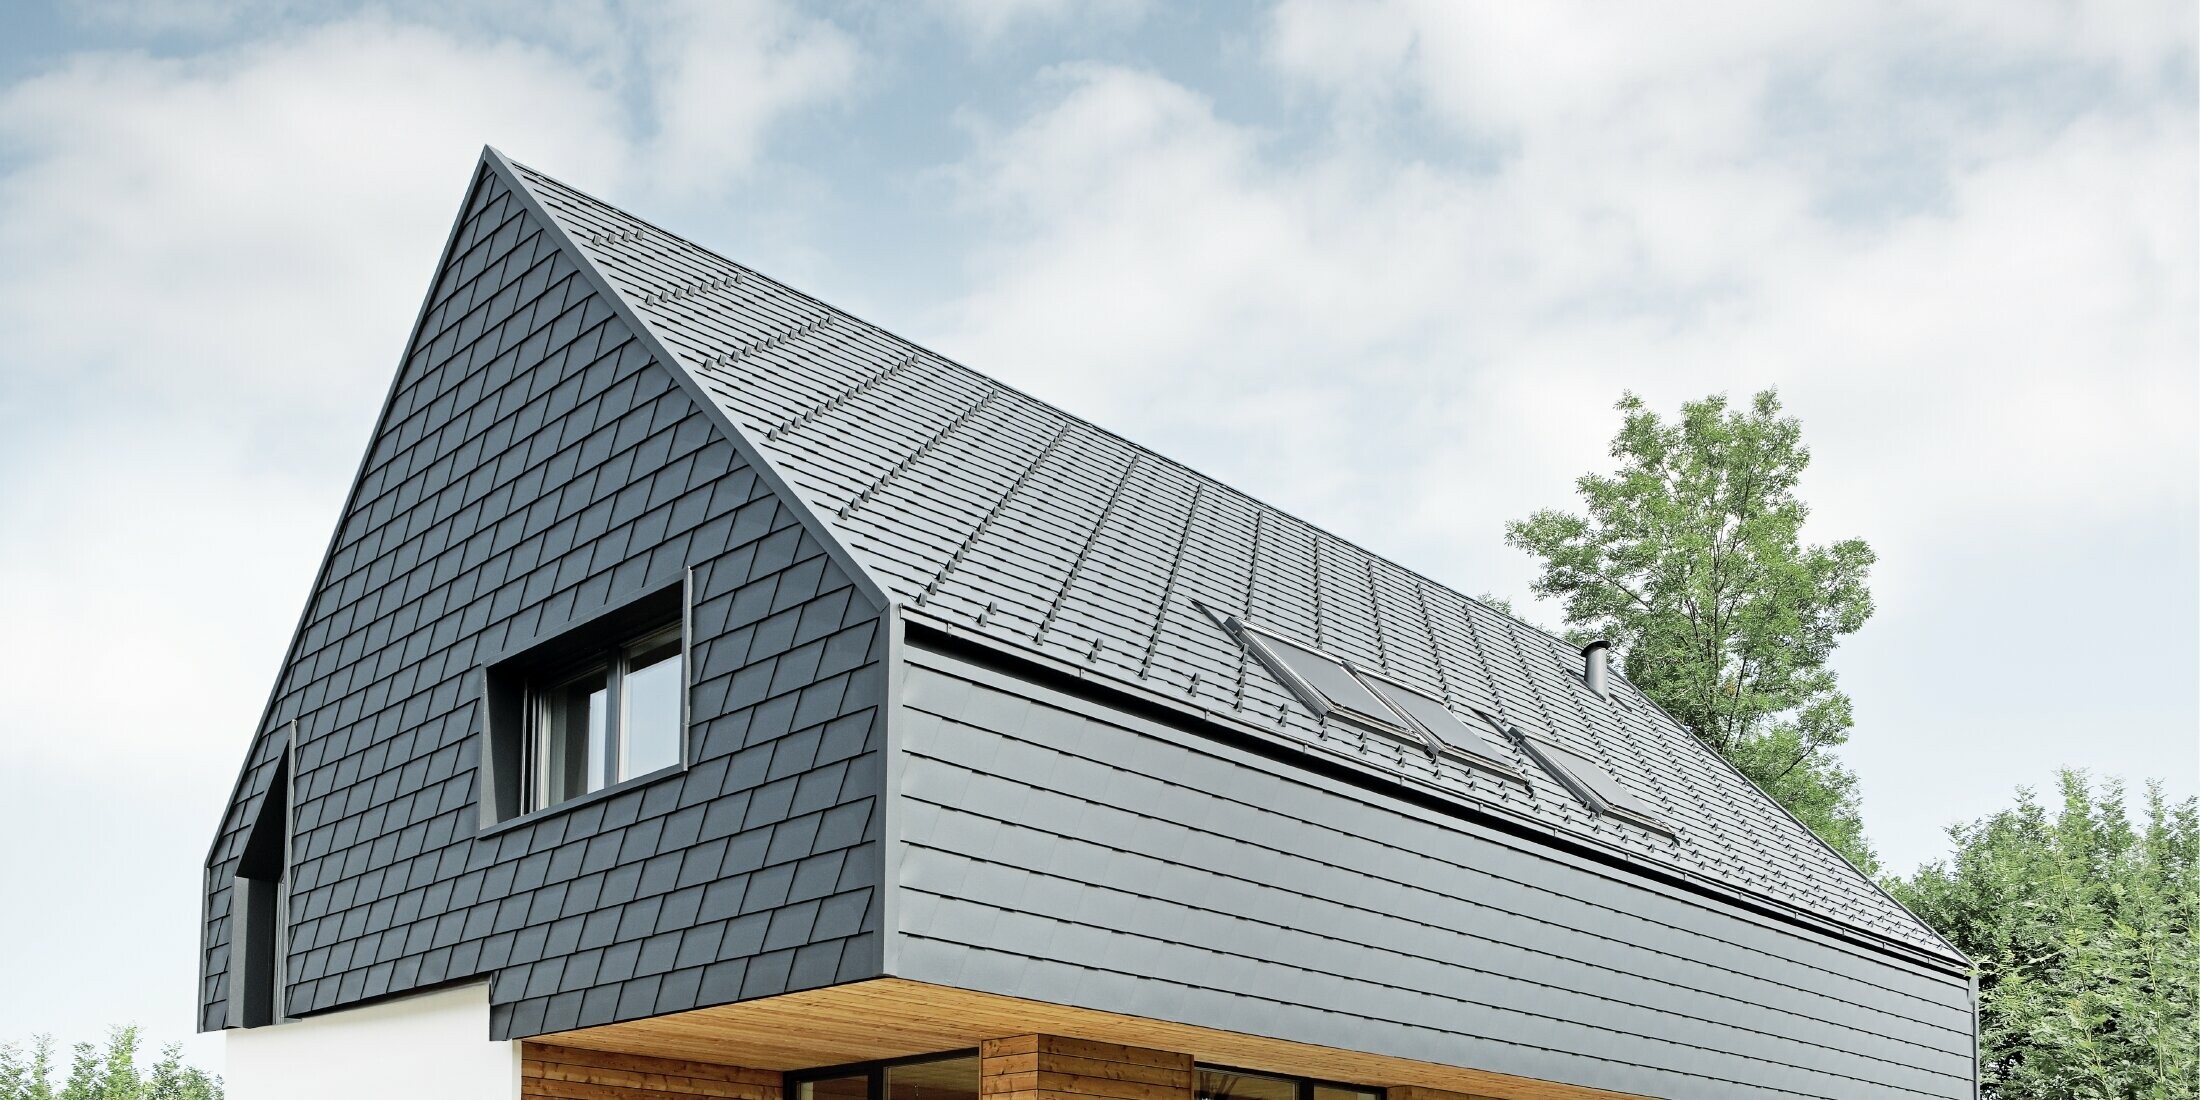 Detached house with gable roof, roofed with PREFA roof shingles in P.10 anthracite, the shingles were also installed on the façade on the upper floor and on the gable.